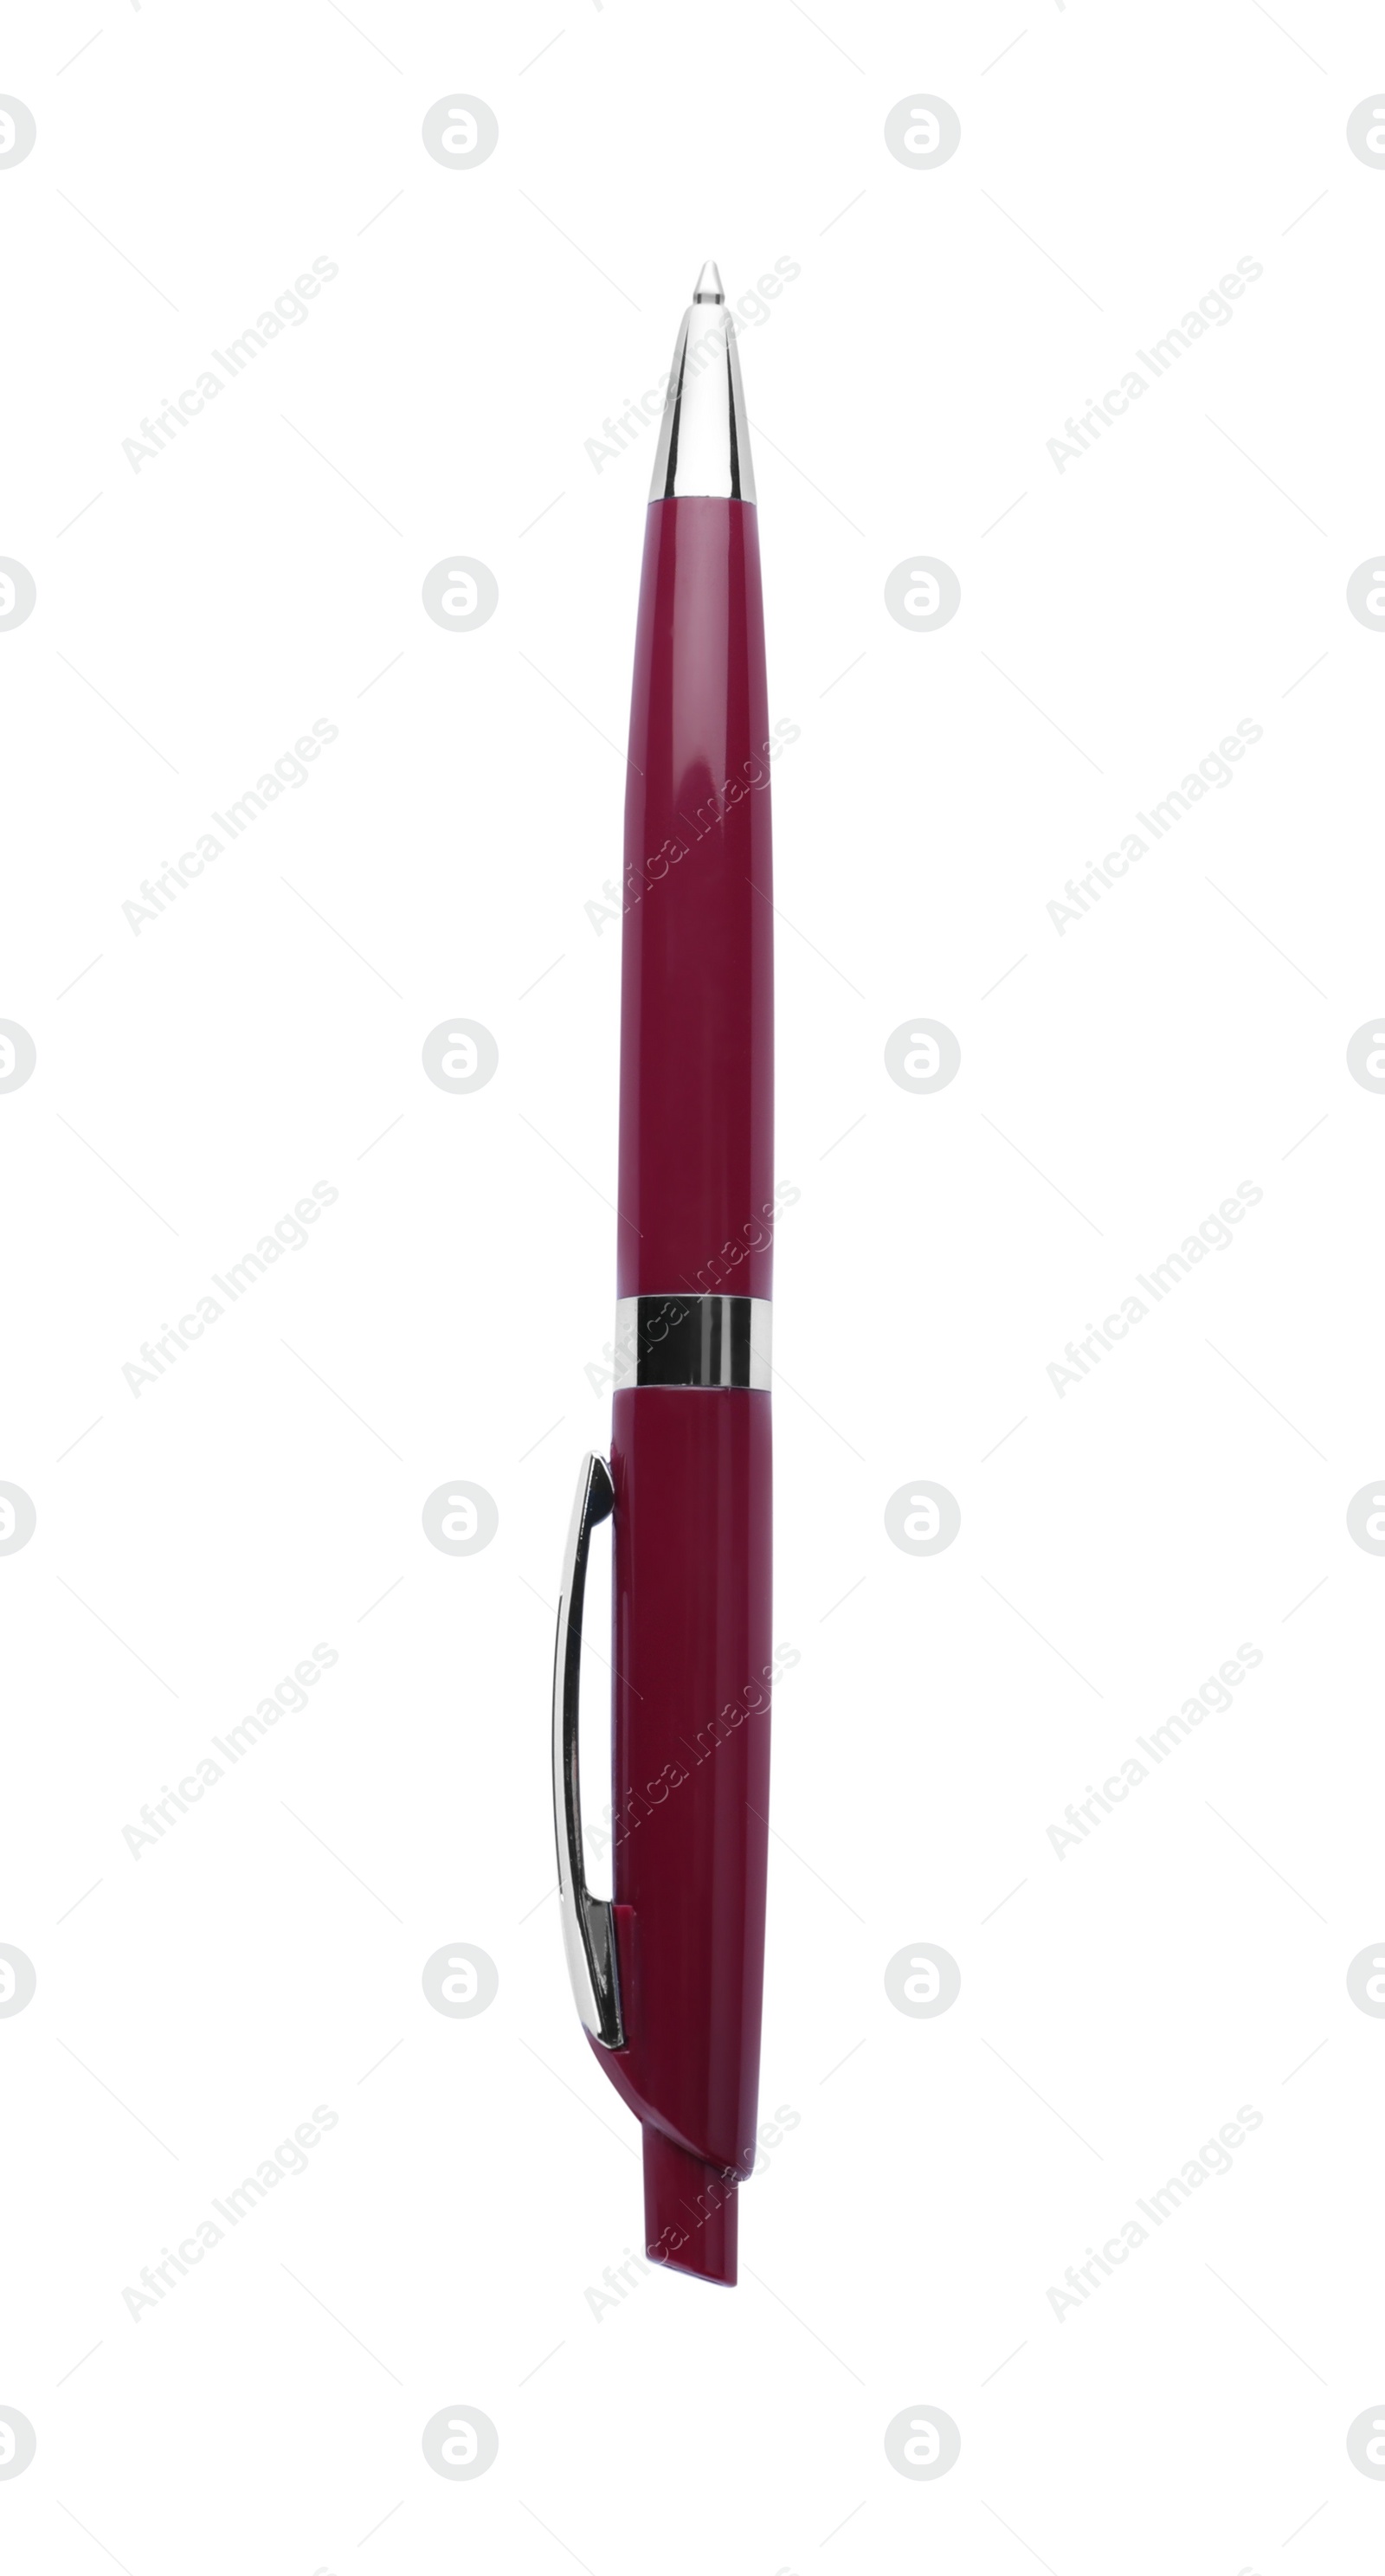 Photo of New retractable pen isolated on white. School stationery